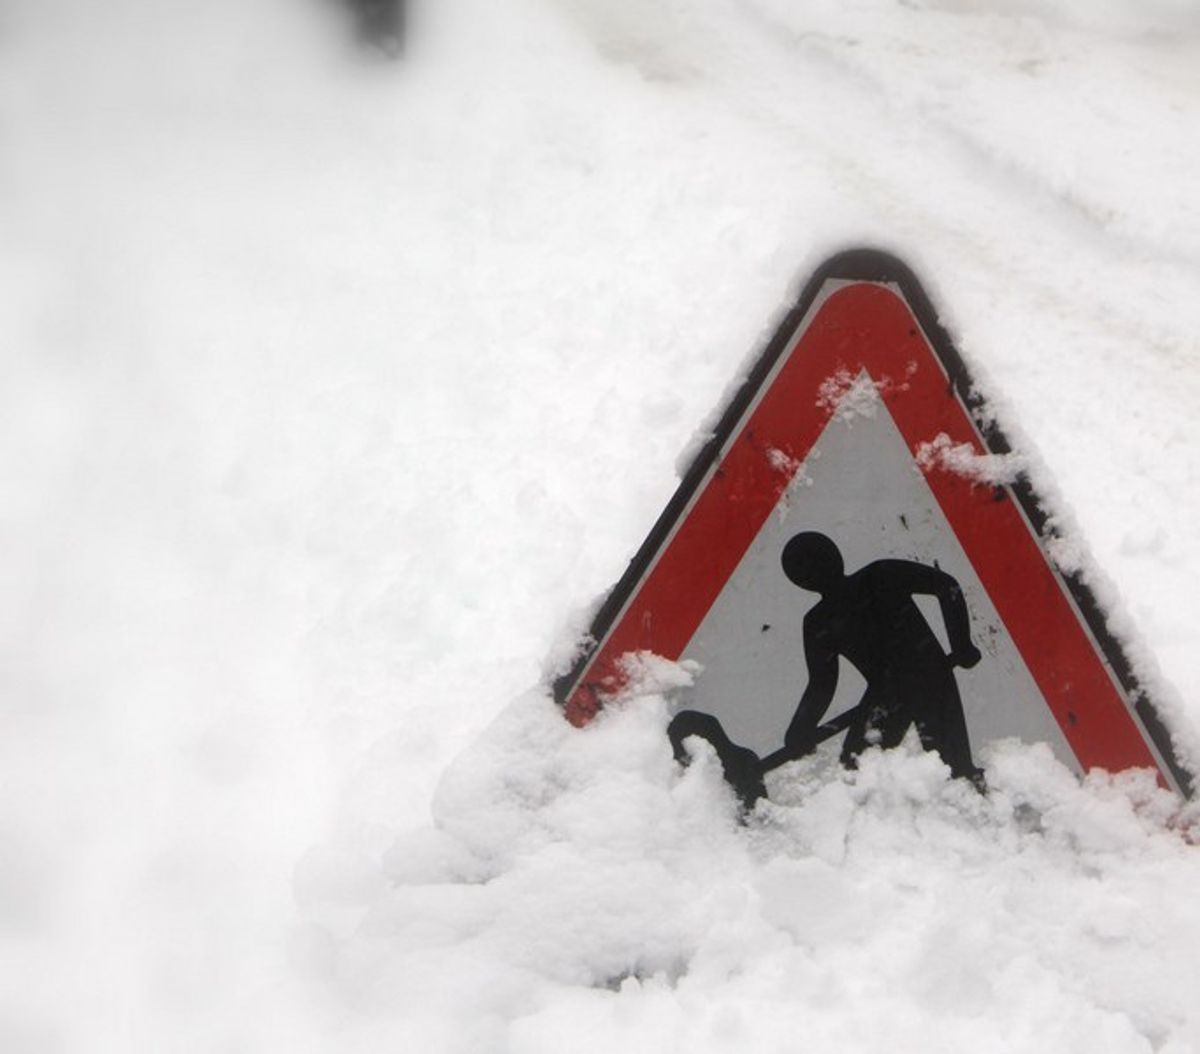 7 Reasons I Hate Winter (Beyond Just 'It's Cold')